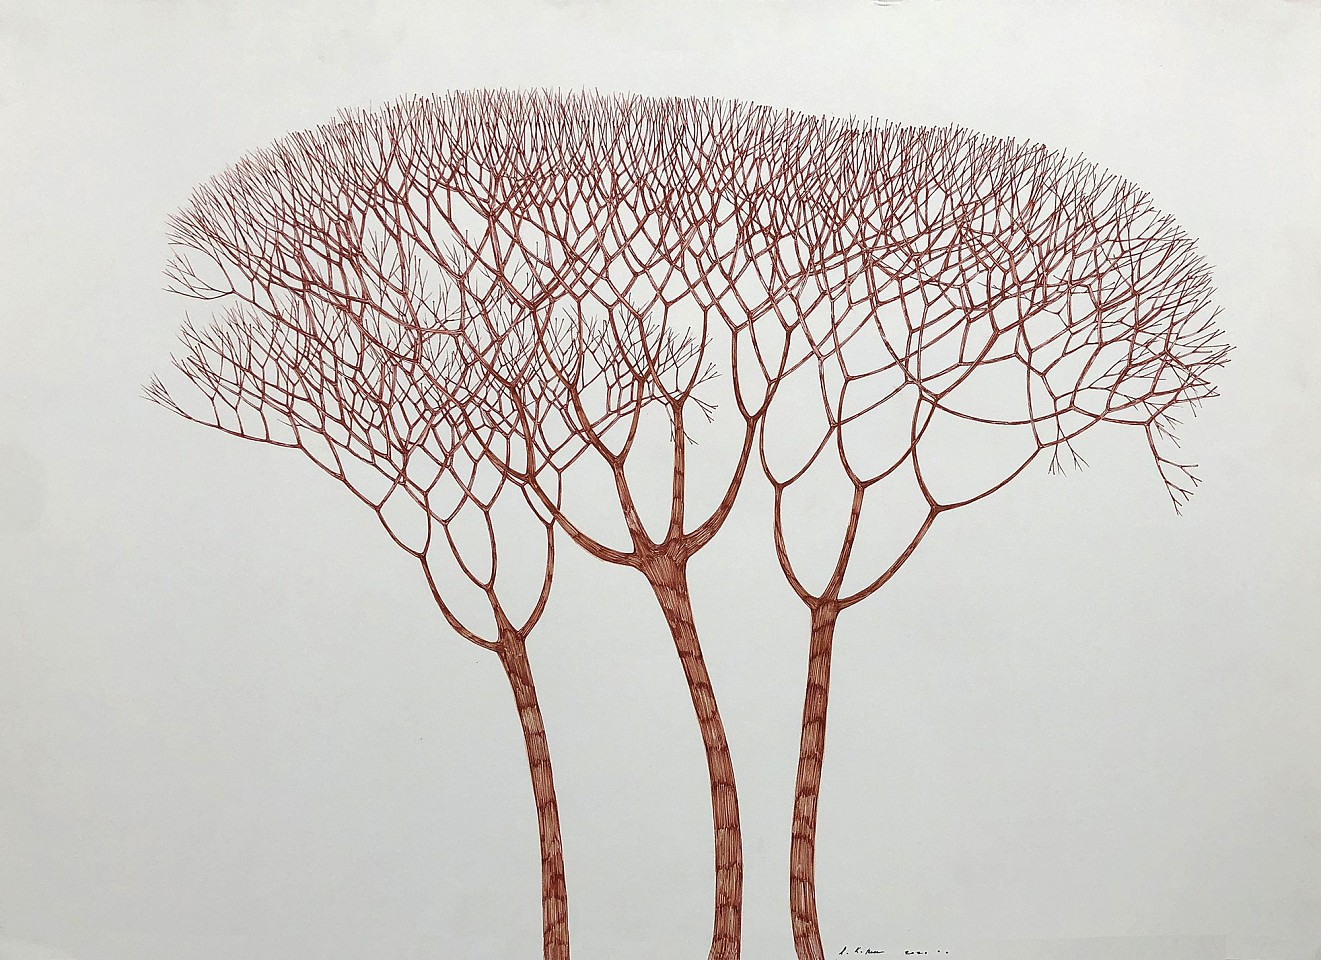 Stewart Helm, Three Trees, 2021
colored inks on paper, 22" x 30"
SH-625
Price Upon Request